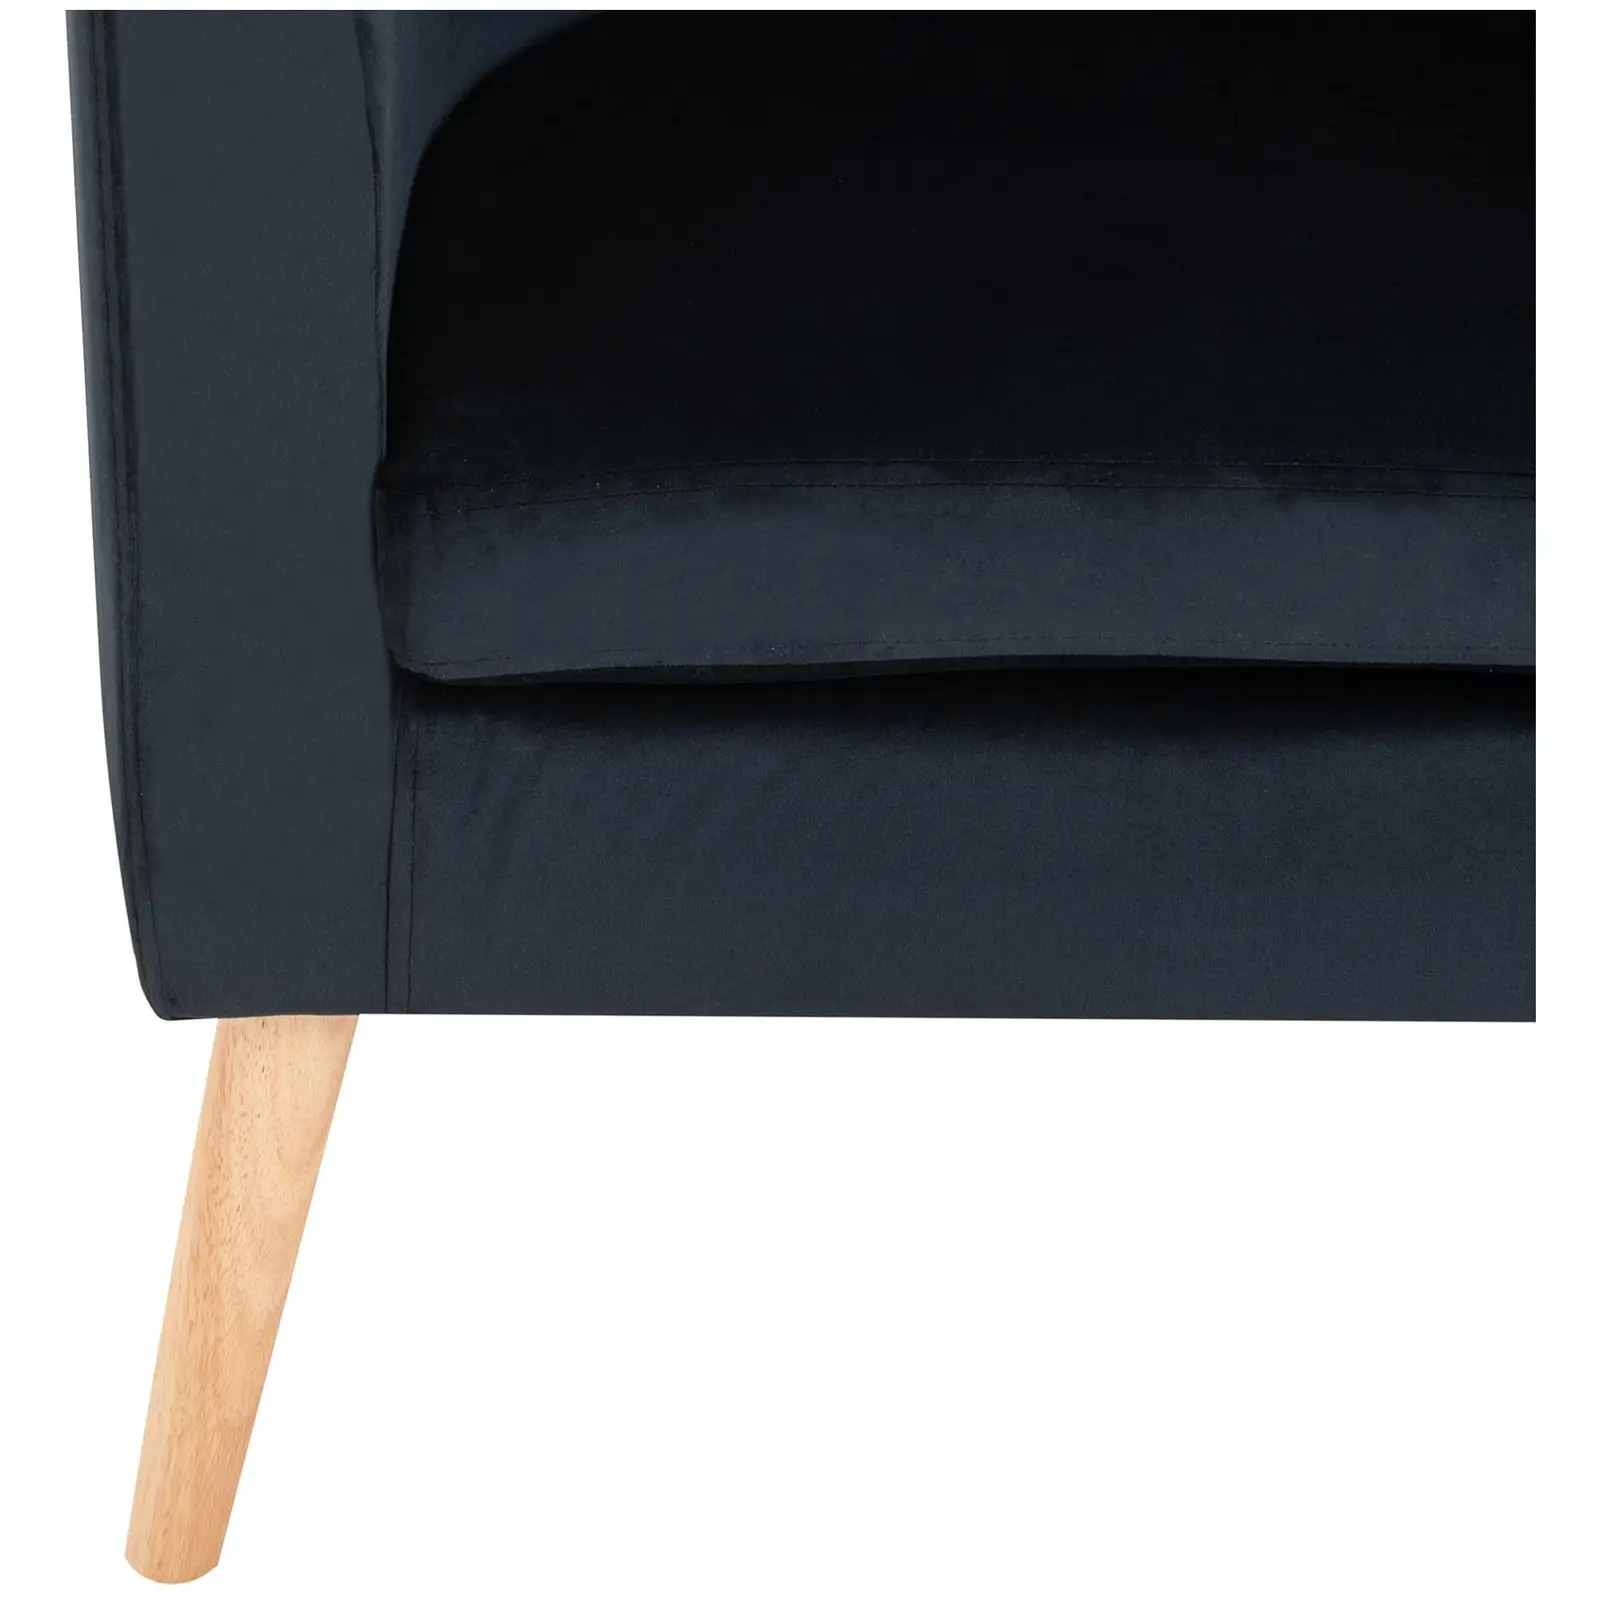 Cushioned Chair - up to 180 kg - seat 49 x 53 cm - black